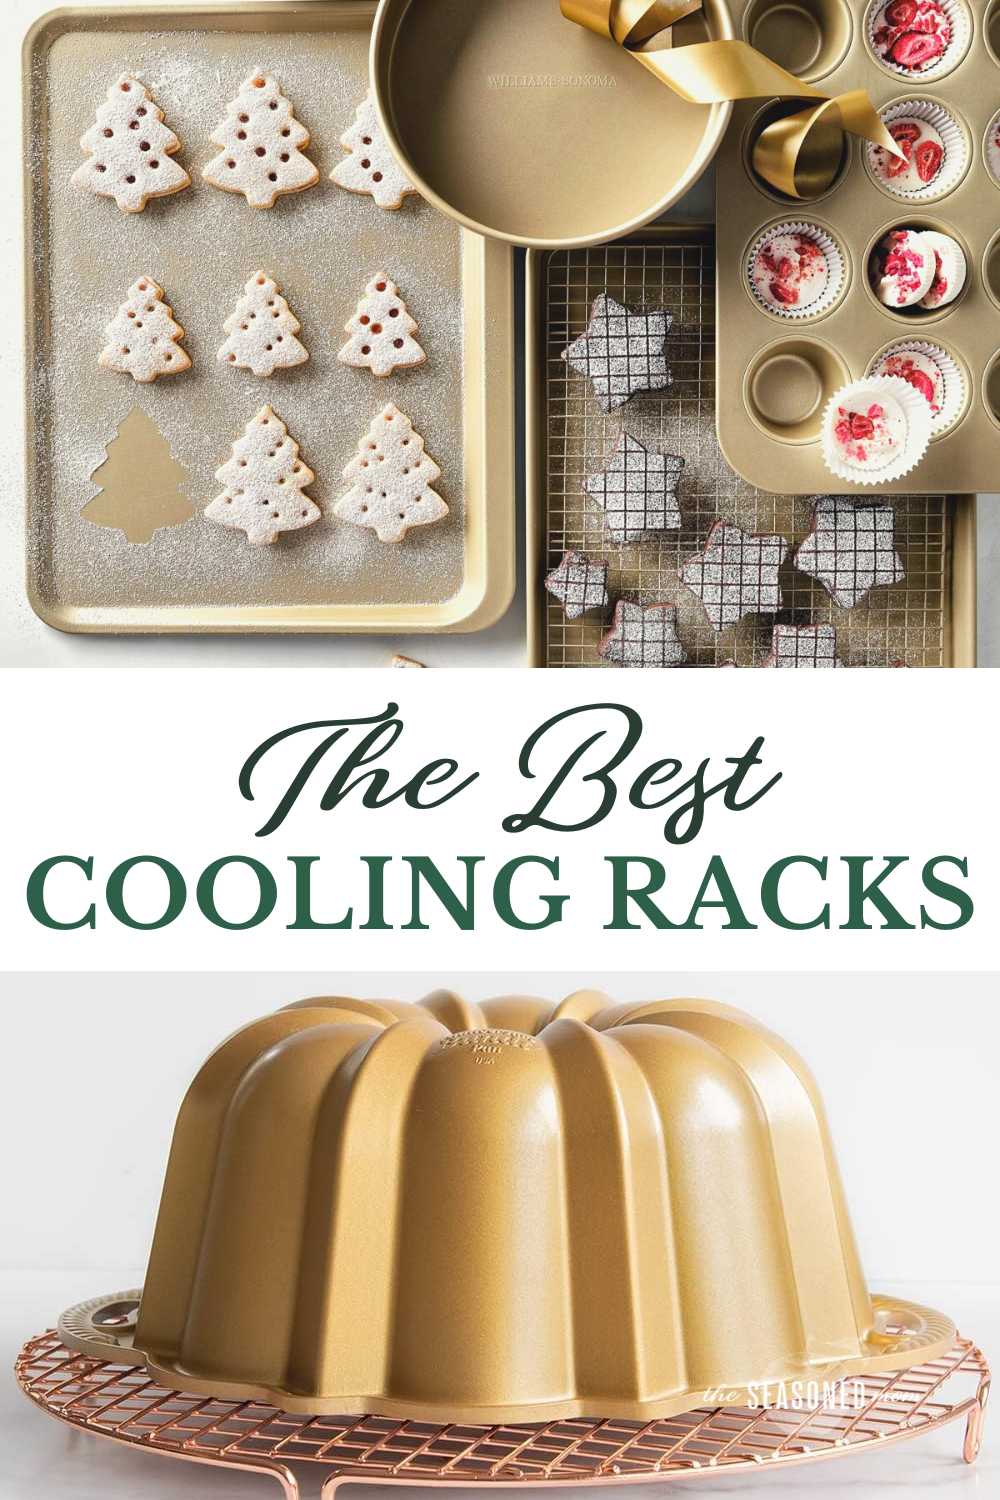 The Best Cooling Racks 